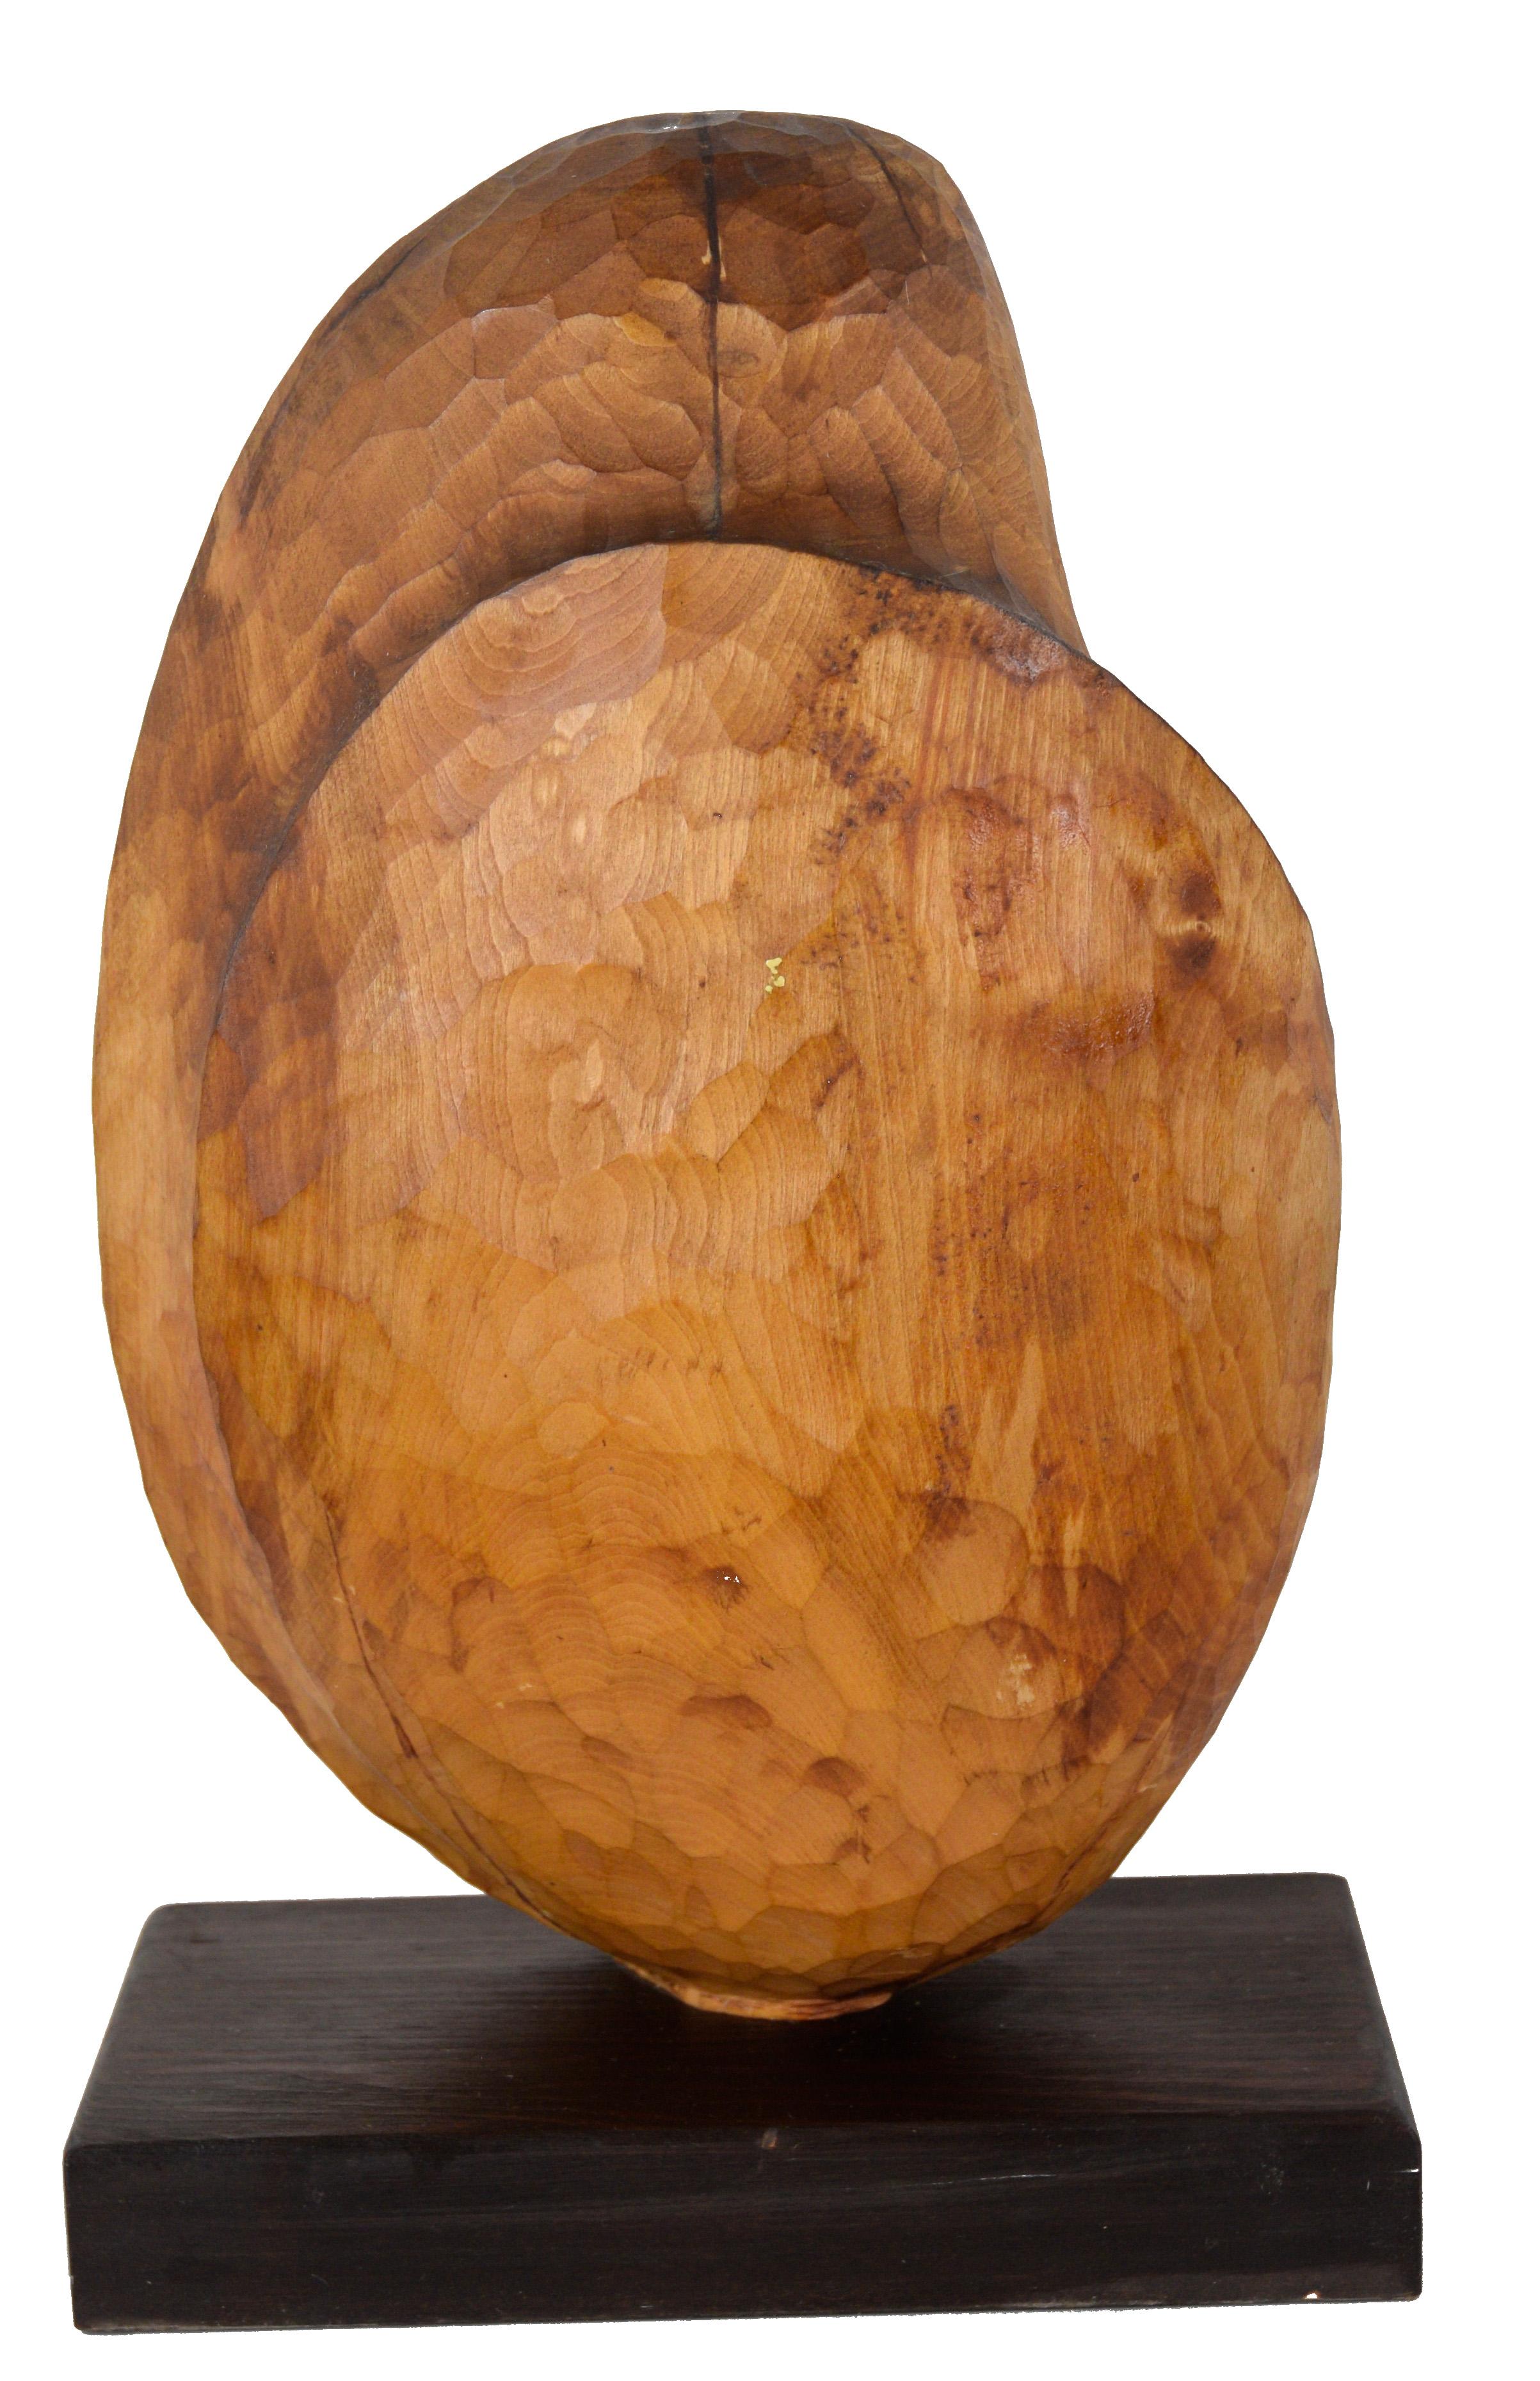 Figurative Hand Carved Wood Sculpture - Juneau, Alaska 1984

Hand carved wooden sculpture, presented on a dark wooden base. The sculpture is somewhat figural, but rather abstract. There is a pleasing proportionality to the piece. It straddles the